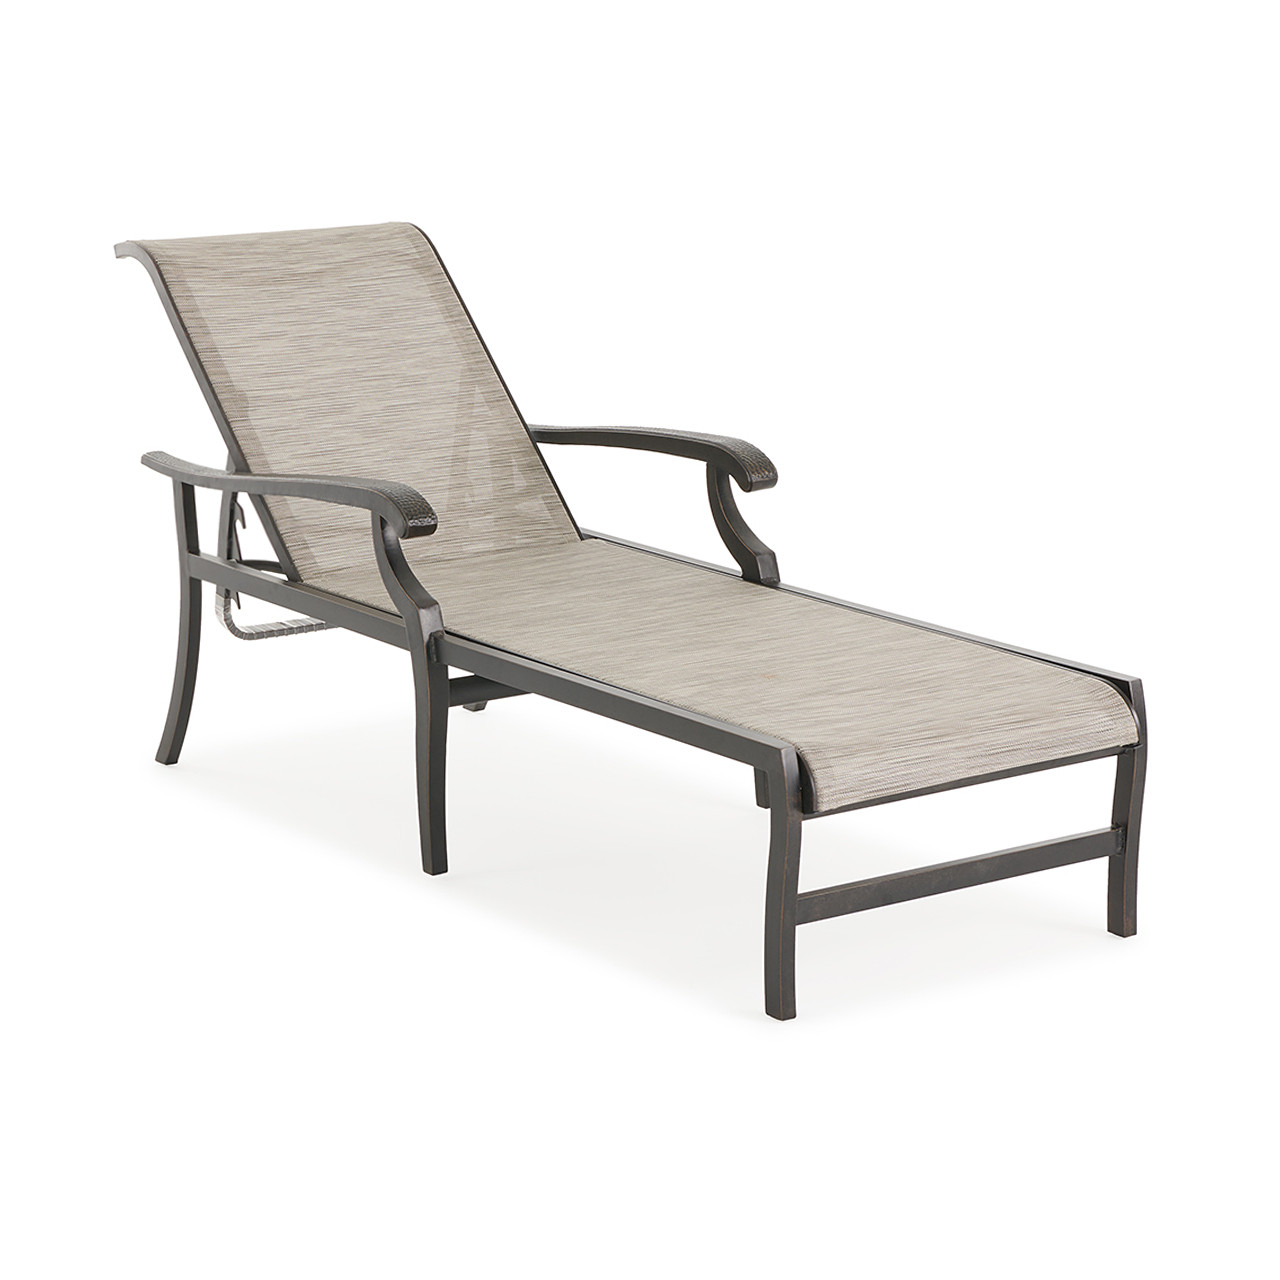 Turin Tawney Aluminum and Watercolor Tweed Pearly Sling Chaise Lounge